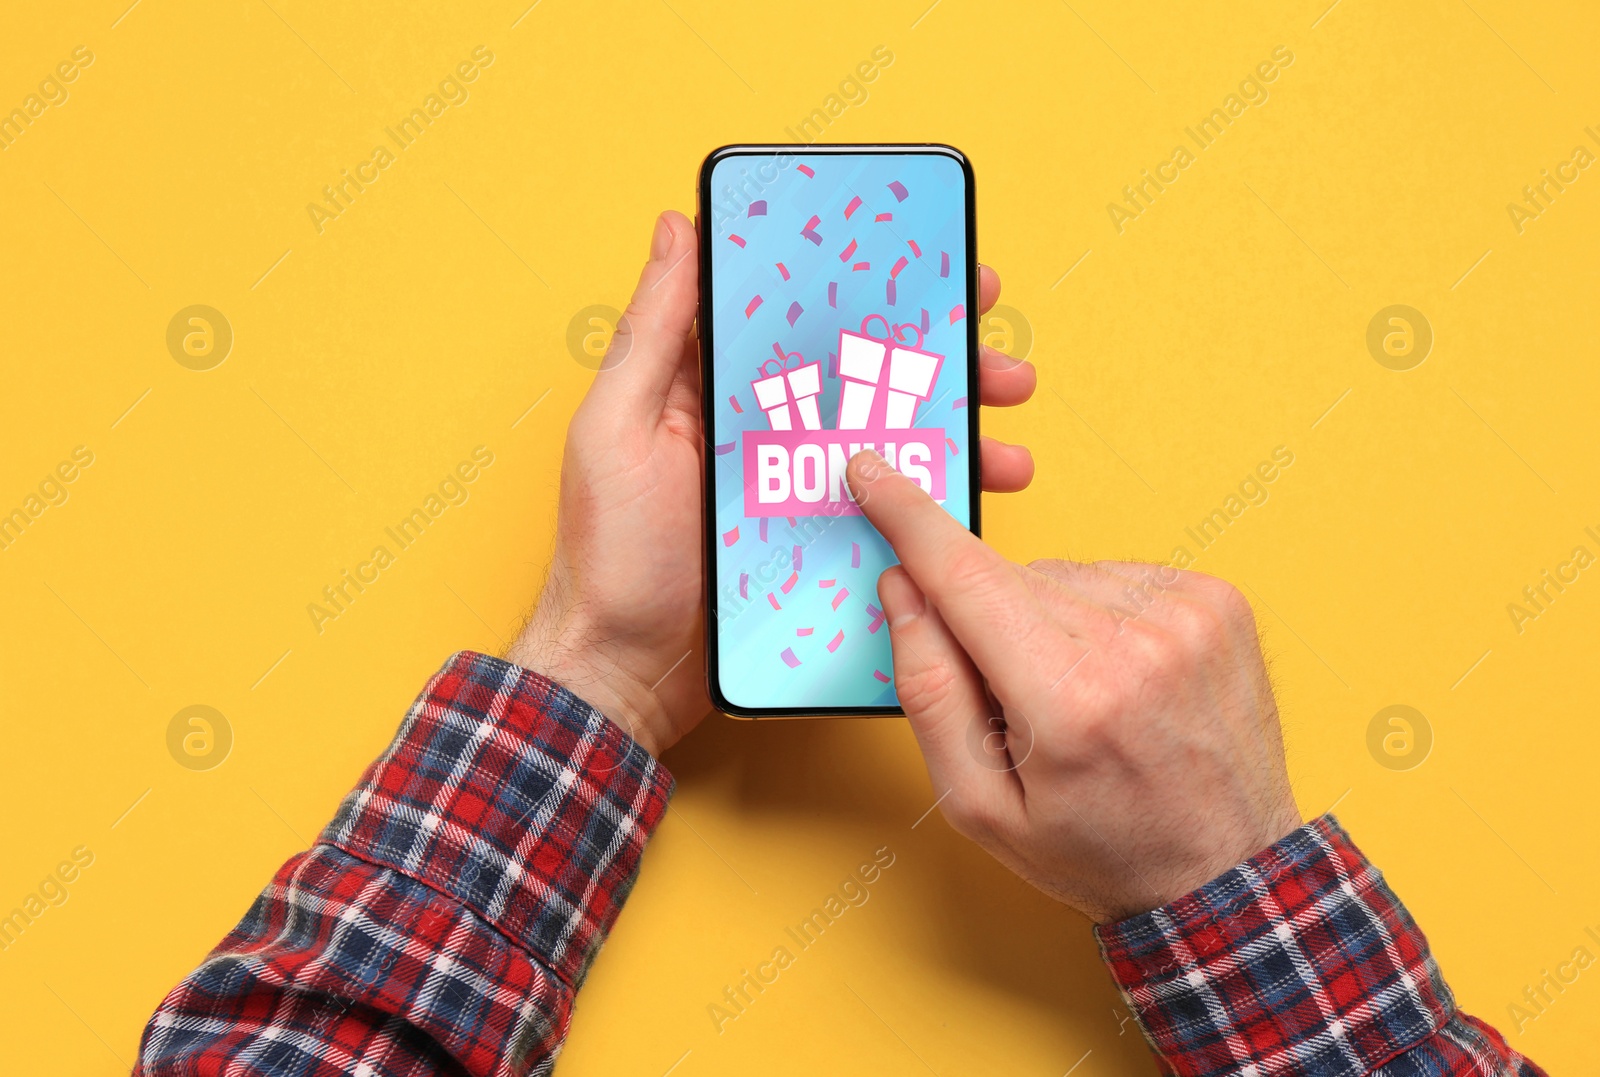 Image of Bonus gaining. Man using smartphone on yellow background, top view. Illustration of gift boxes, word and falling confetti on device screen